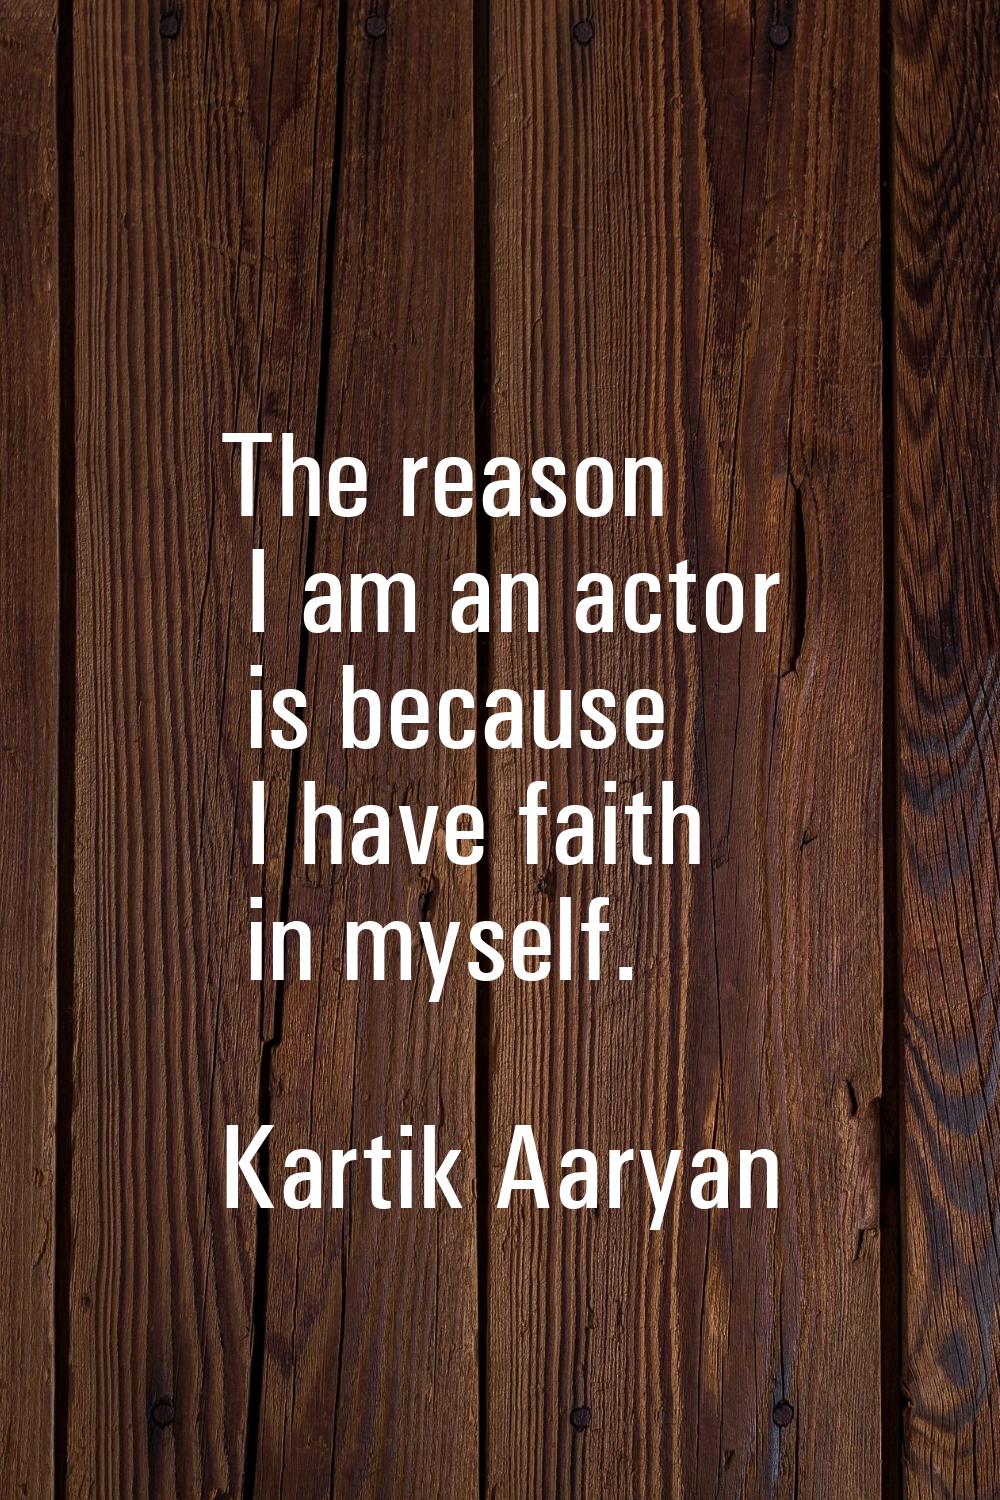 The reason I am an actor is because I have faith in myself.